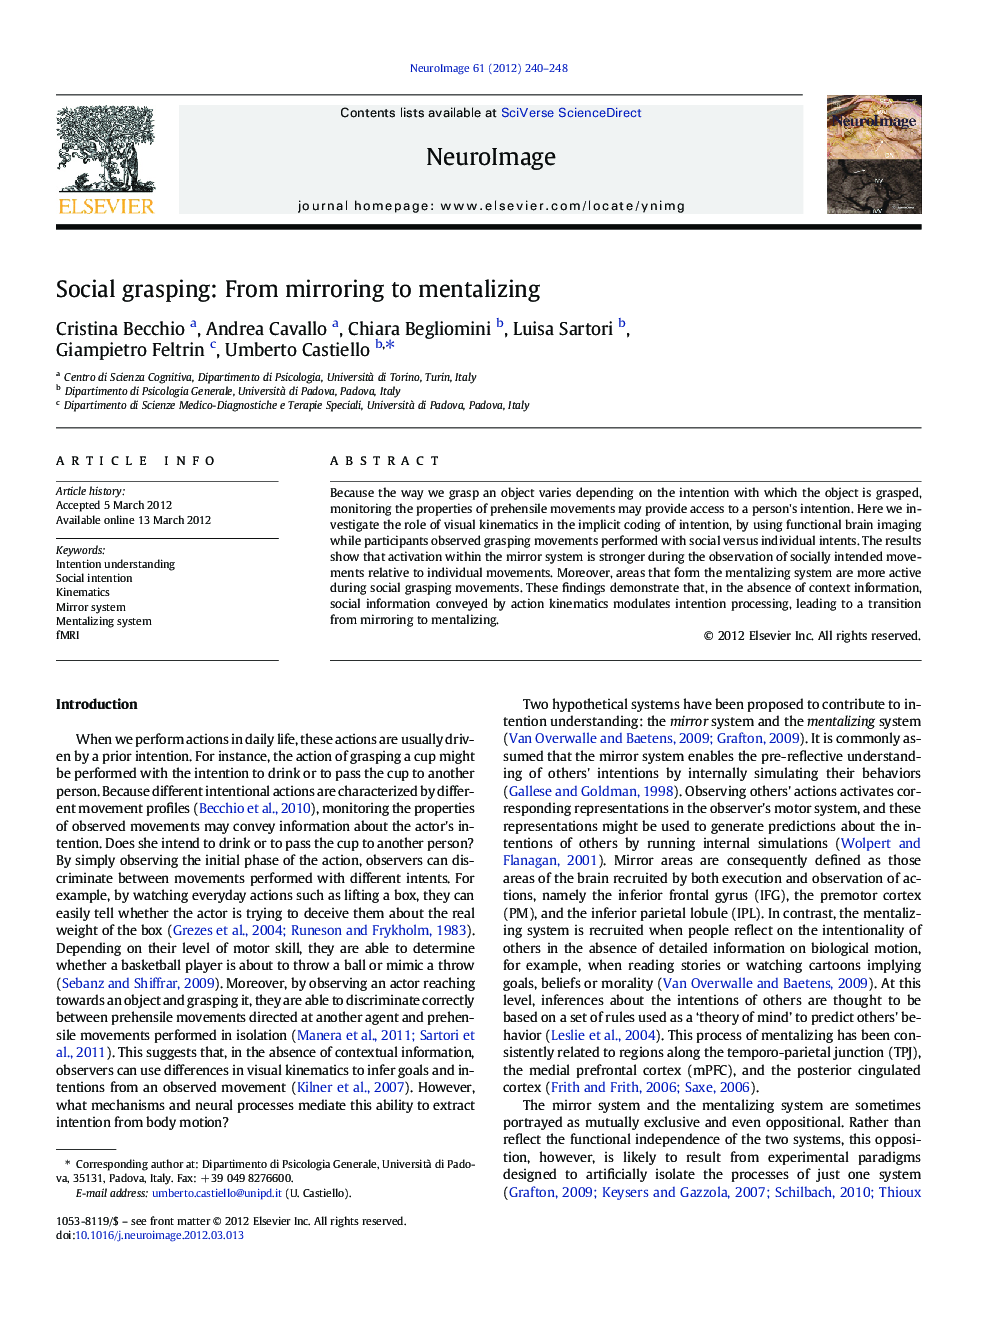 Social grasping: From mirroring to mentalizing